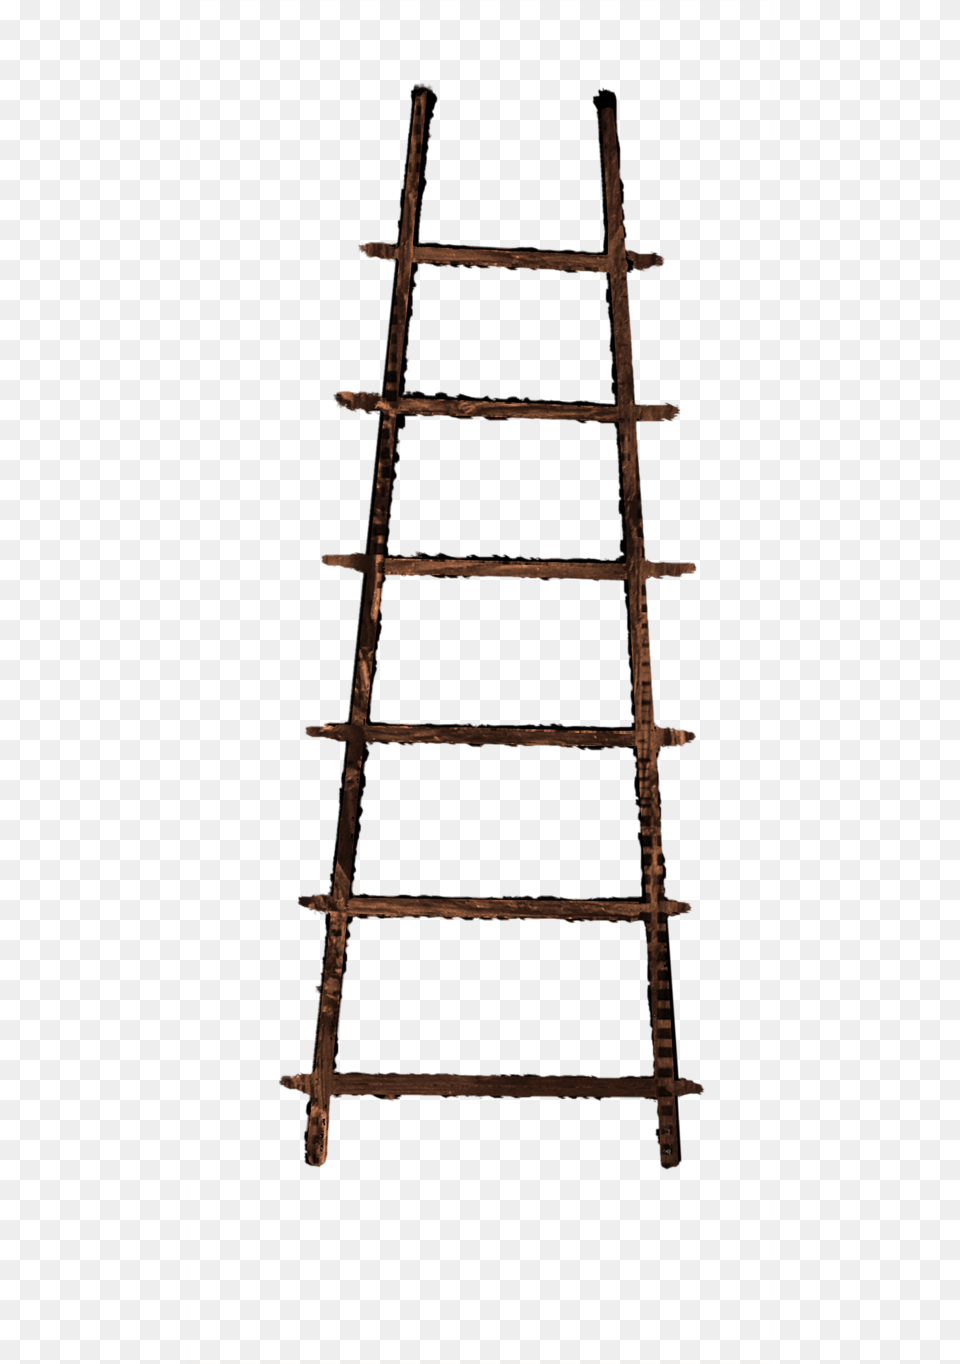 Old Ladder Rough Wood Grain Cutout By Annamae22 Rope Ladder, Construction, Scaffolding Free Png Download